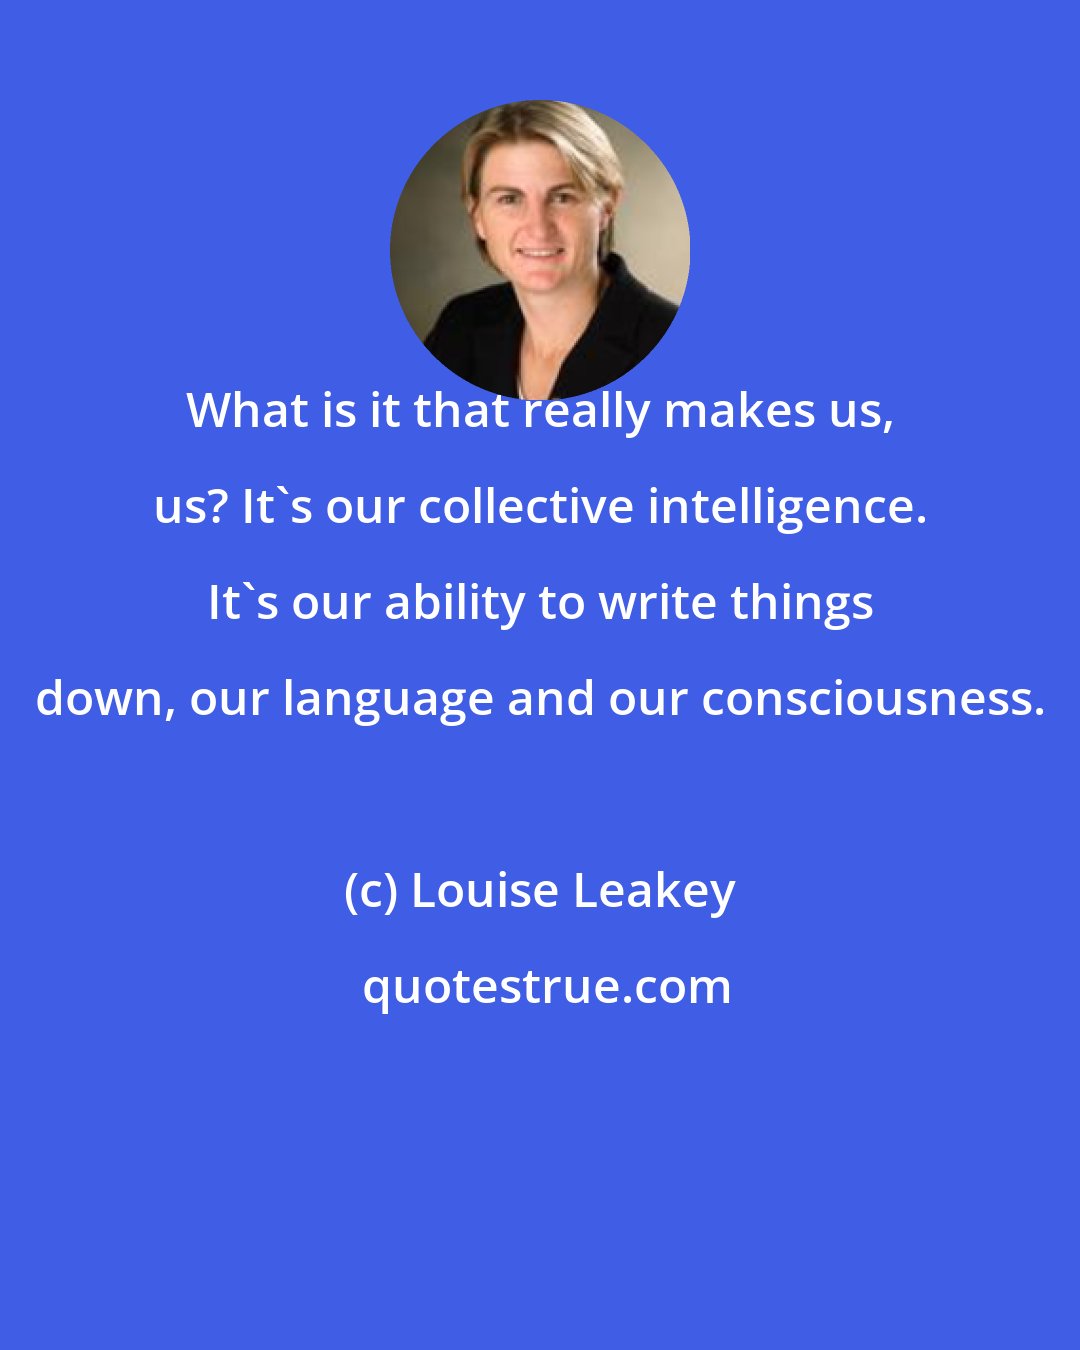 Louise Leakey: What is it that really makes us, us? It's our collective intelligence. It's our ability to write things down, our language and our consciousness.